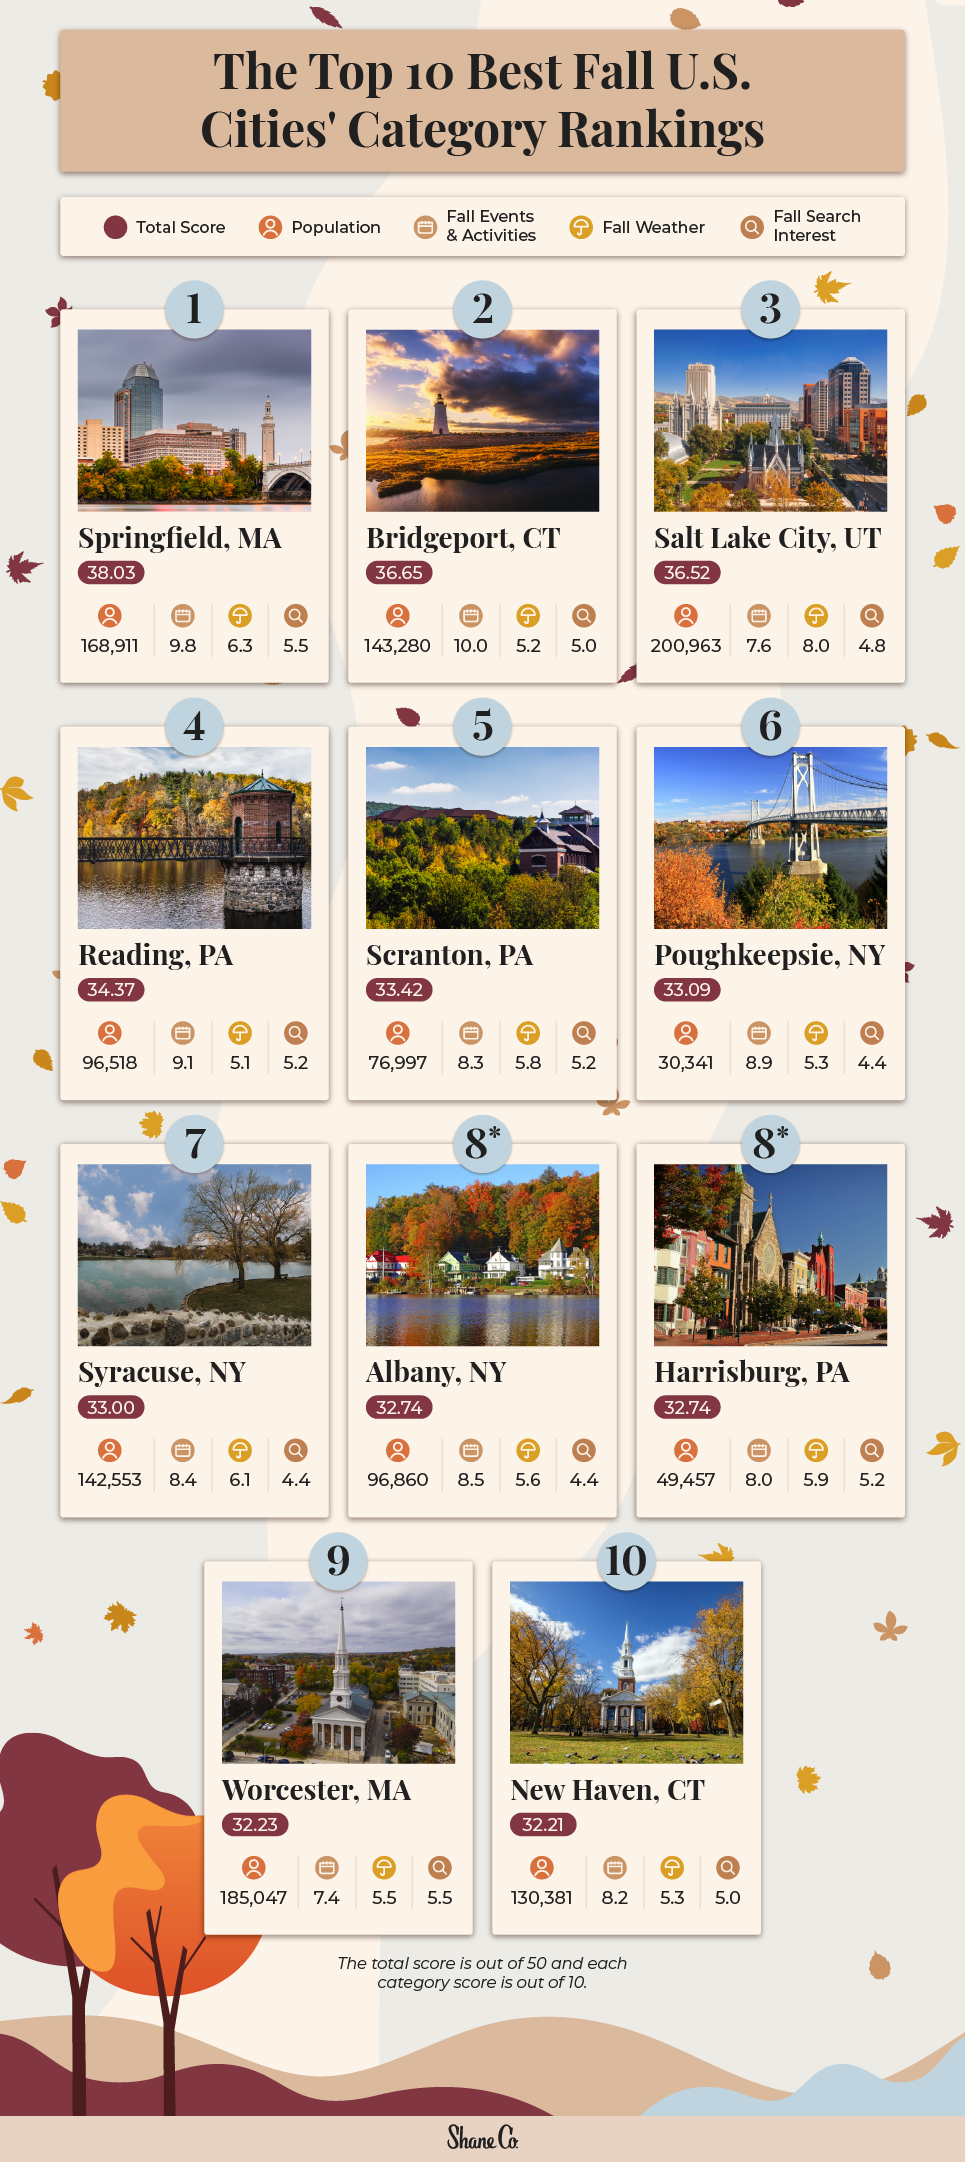 A graphic highlighting the top 10 cities for fall lovers.